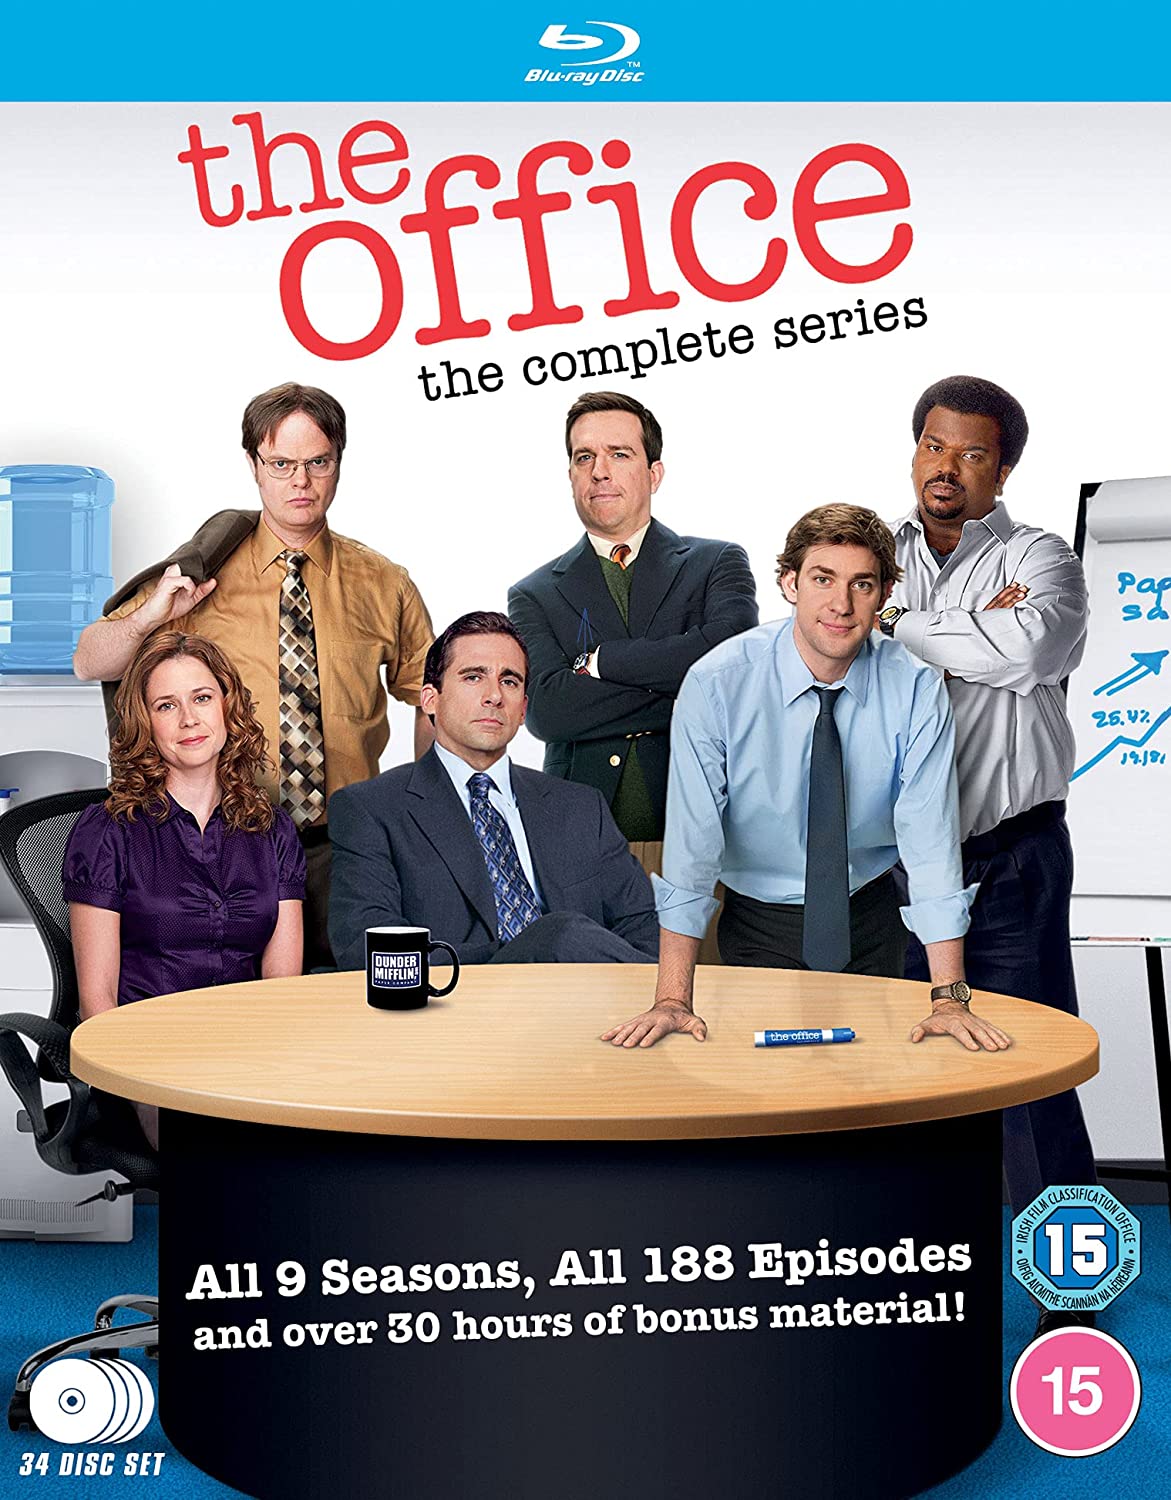 boom competitions -  win The Office (US): the Complete Series on Blu-ray